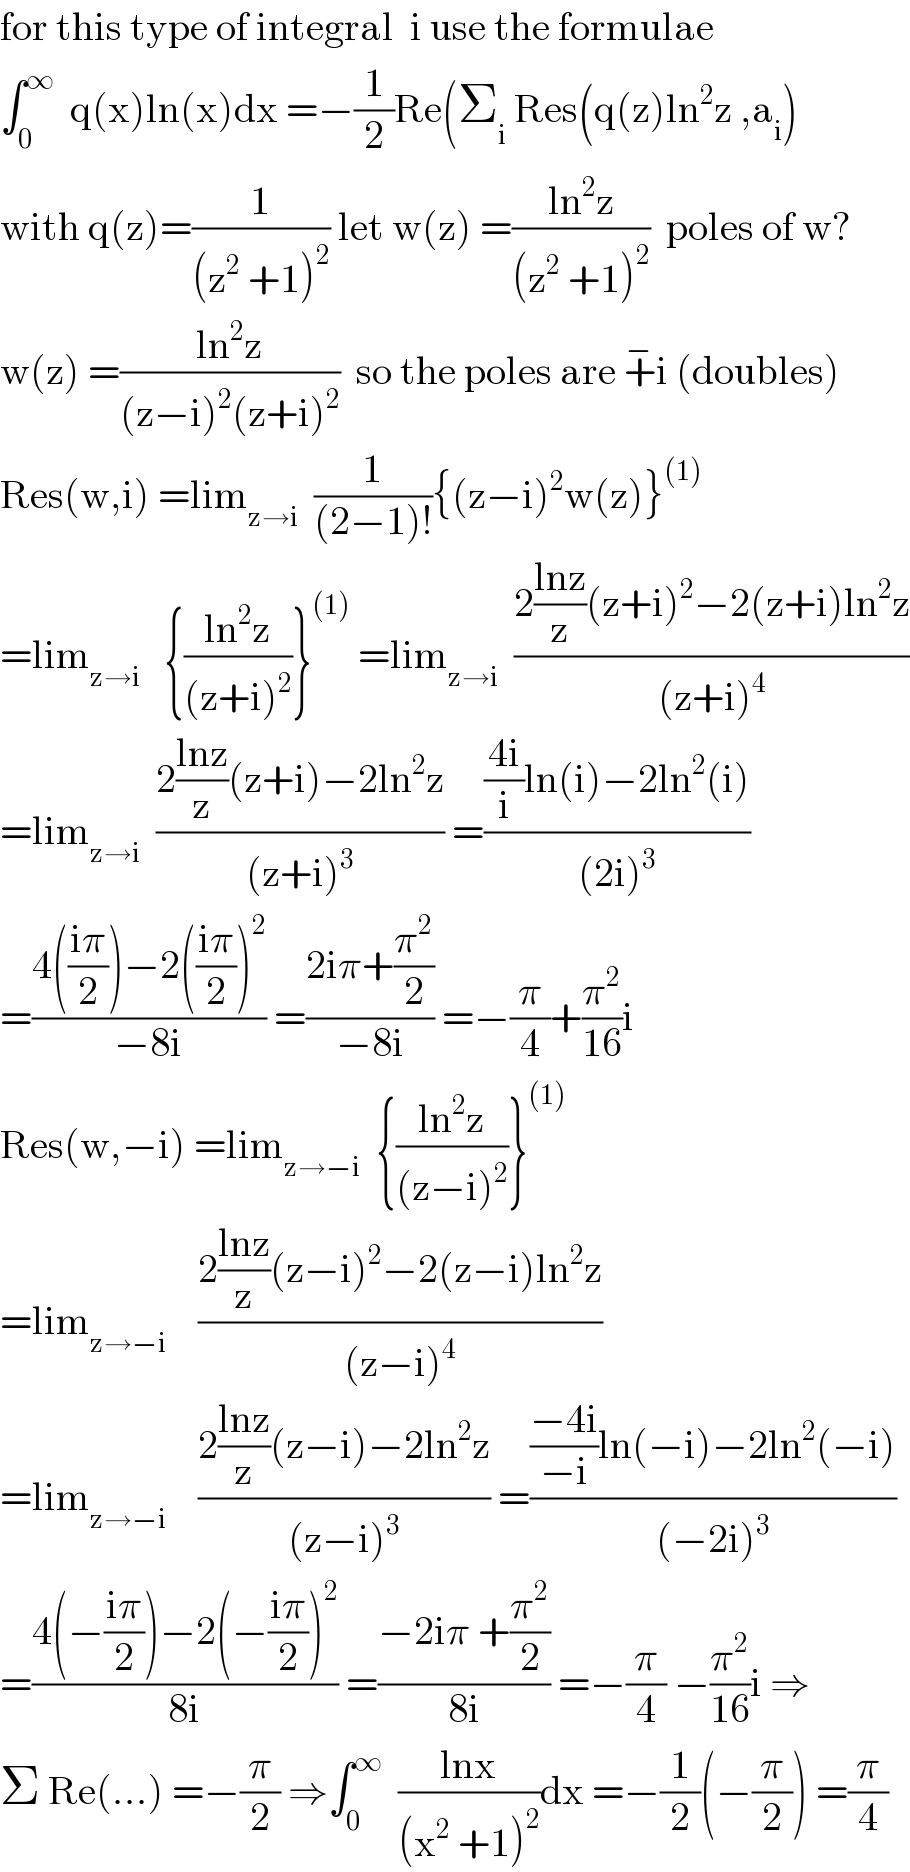 for this type of integral  i use the formulae  ∫_0 ^∞   q(x)ln(x)dx =−(1/2)Re(Σ_i  Res(q(z)ln^2 z ,a_i )  with q(z)=(1/((z^2  +1)^2 )) let w(z) =((ln^2 z)/((z^2  +1)^2 ))  poles of w?  w(z) =((ln^2 z)/((z−i)^2 (z+i)^2 ))  so the poles are +^− i (doubles)  Res(w,i) =lim_(z→i)   (1/((2−1)!)){(z−i)^2 w(z)}^((1))   =lim_(z→i)    {((ln^2 z)/((z+i)^2 ))}^((1))  =lim_(z→i)   ((2((lnz)/z)(z+i)^2 −2(z+i)ln^2 z)/((z+i)^4 ))  =lim_(z→i)   ((2((lnz)/z)(z+i)−2ln^2 z)/((z+i)^3 )) =((((4i)/i)ln(i)−2ln^2 (i))/((2i)^3 ))  =((4(((iπ)/2))−2(((iπ)/2))^2 )/(−8i)) =((2iπ+(π^2 /2))/(−8i)) =−(π/4)+(π^2 /(16))i  Res(w,−i) =lim_(z→−i)   {((ln^2 z)/((z−i)^2 ))}^((1))   =lim_(z→−i)     ((2((lnz)/z)(z−i)^2 −2(z−i)ln^2 z)/((z−i)^4 ))  =lim_(z→−i)     ((2((lnz)/z)(z−i)−2ln^2 z)/((z−i)^3 )) =((((−4i)/(−i))ln(−i)−2ln^2 (−i))/((−2i)^3 ))  =((4(−((iπ)/2))−2(−((iπ)/2))^2 )/(8i)) =((−2iπ +(π^2 /2))/(8i)) =−(π/4) −(π^2 /(16))i ⇒  Σ Re(...) =−(π/2) ⇒∫_0 ^∞   ((lnx)/((x^2  +1)^2 ))dx =−(1/2)(−(π/2)) =(π/4)  